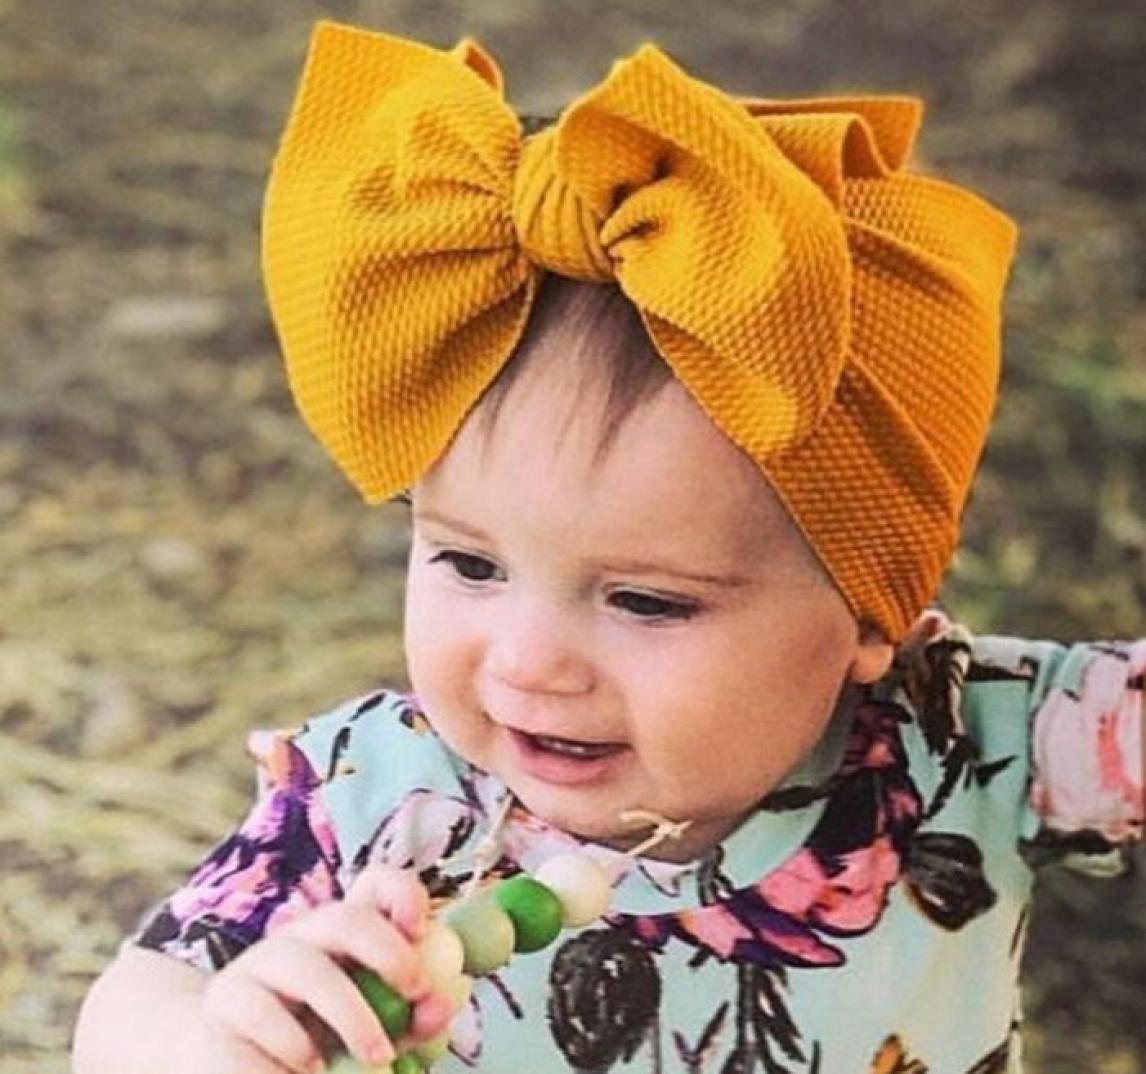 

Cute Big Bow Hairband Baby Girls Toddler Kids Elastic Headband Knotted Nylon Turban Head Wraps Bowknot Hair Accessories5801029, Red